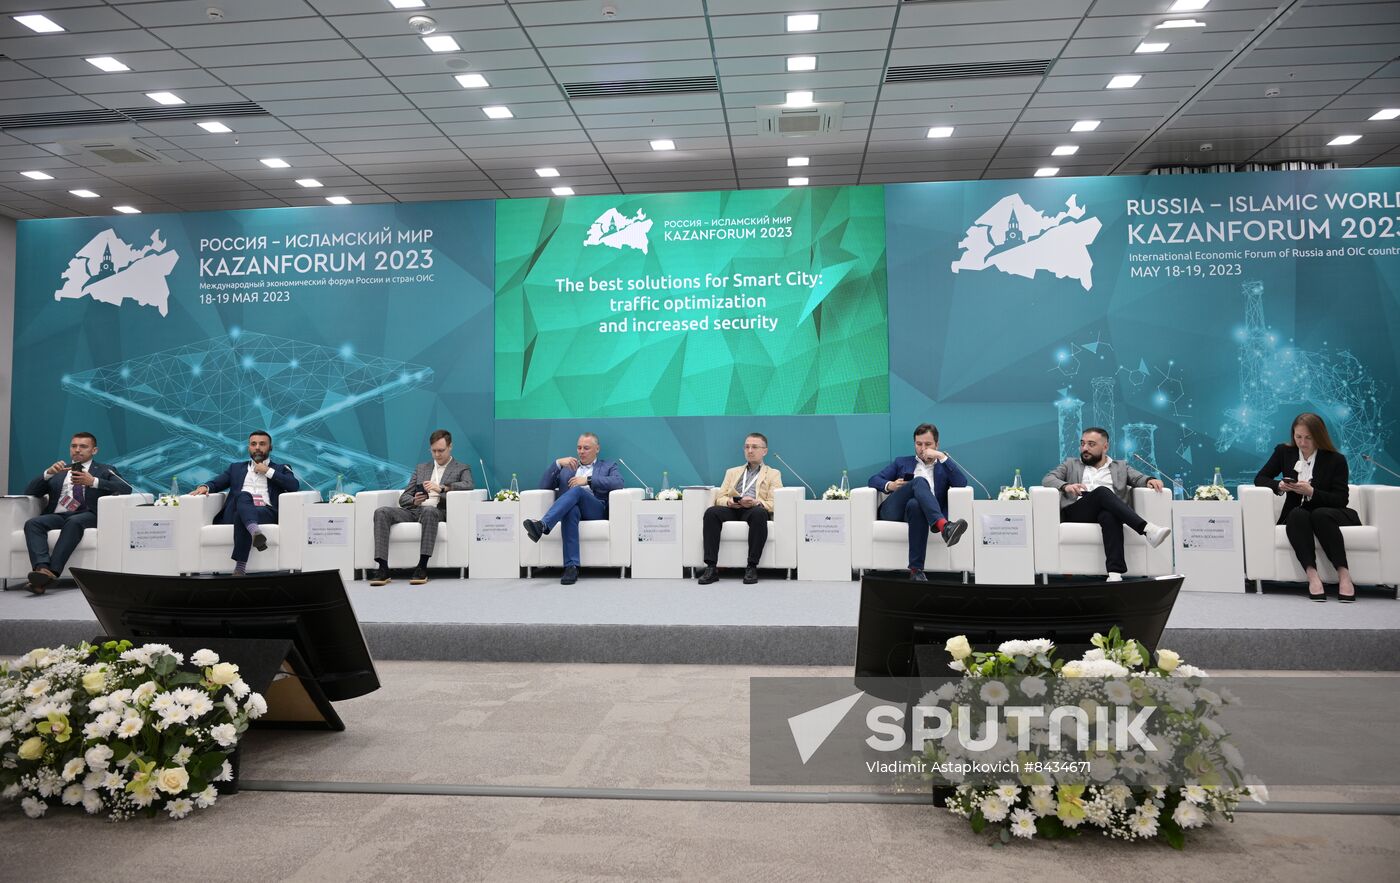 KAZANFORUM 2023. The Best Solutions for Smart City: Optimizing Traffic and Improving Security